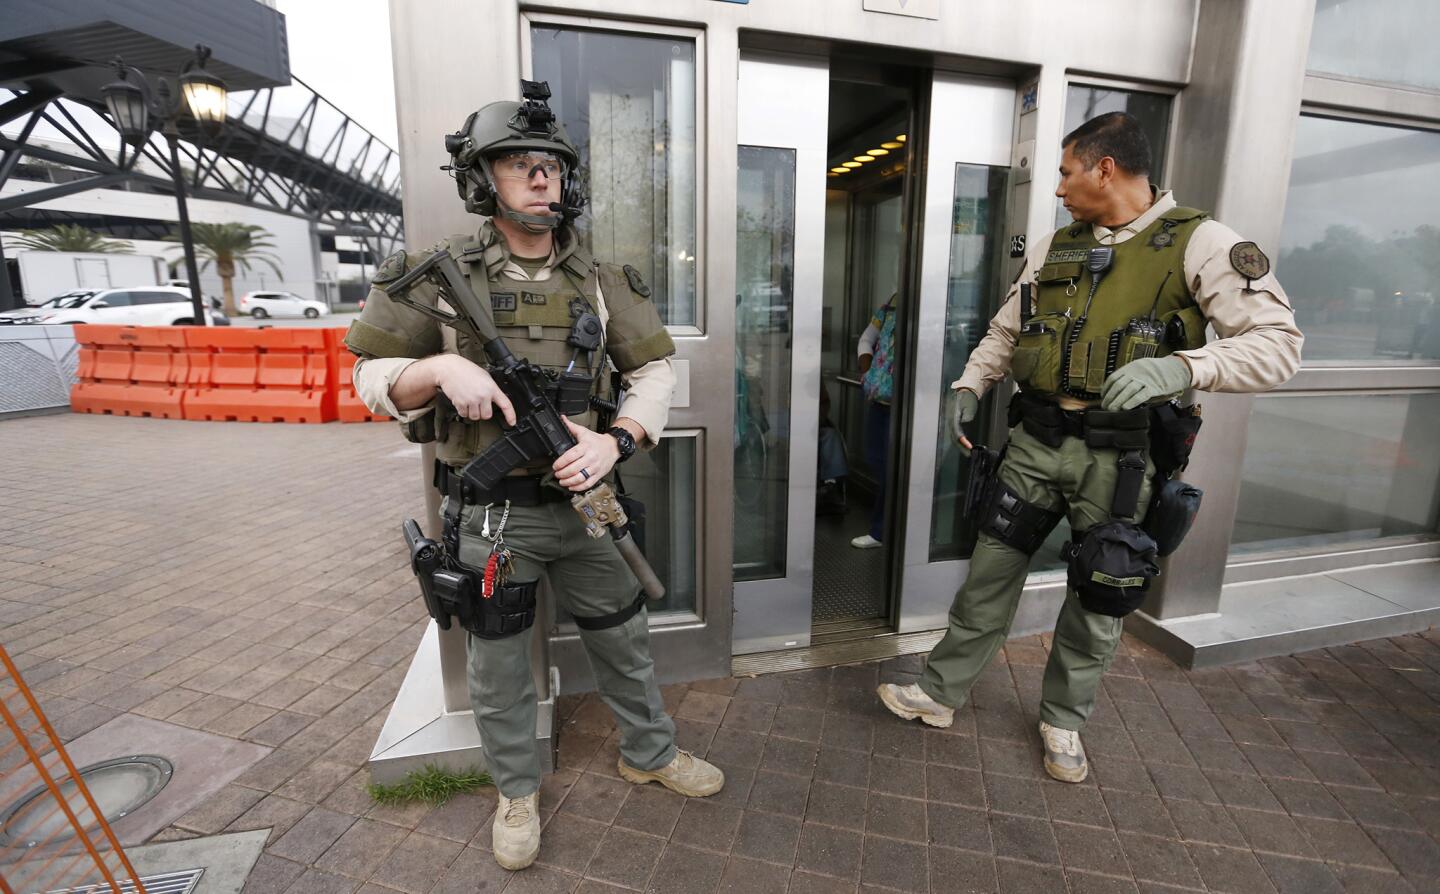 The Los Angeles County Sheriff's Department had extra security at the entrance to the Metro Red Line's Universal City station Tuesday after a report of a planned terrorist attack.